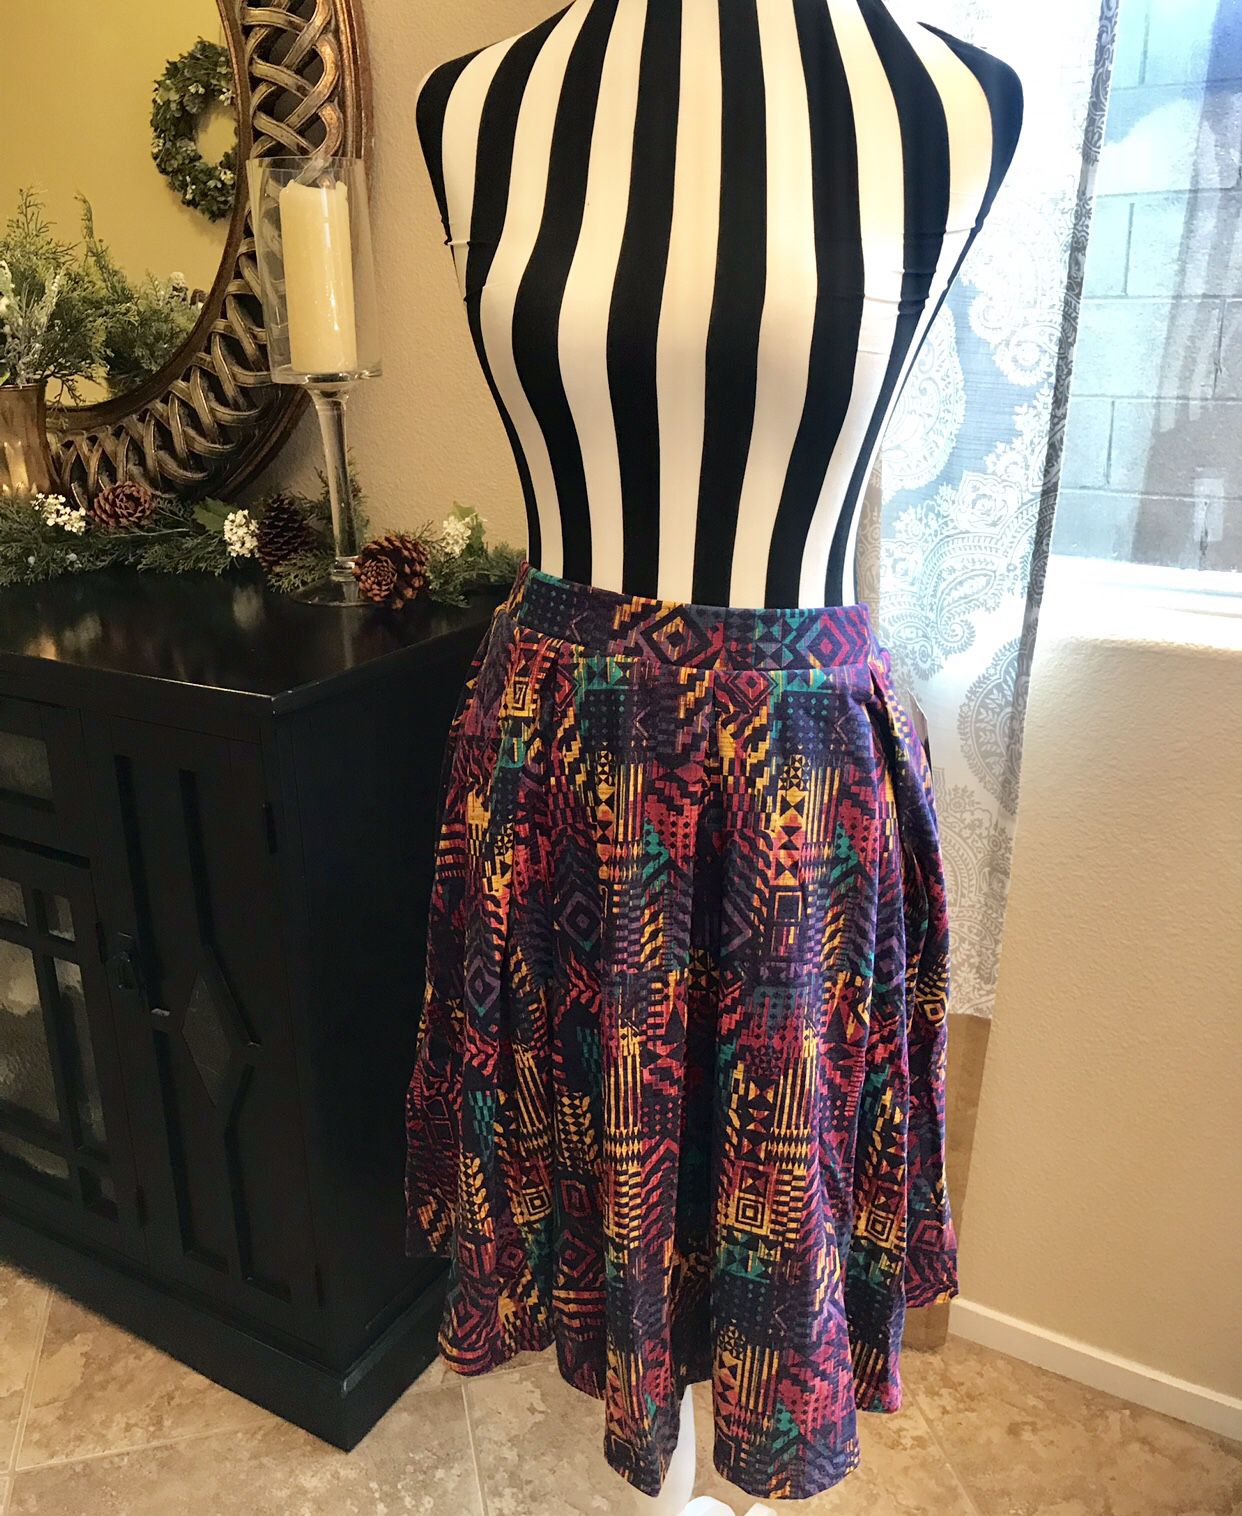 BRAND New With Tag ONLY $18 Adorable LulaRoe Madison Skirt Size Med